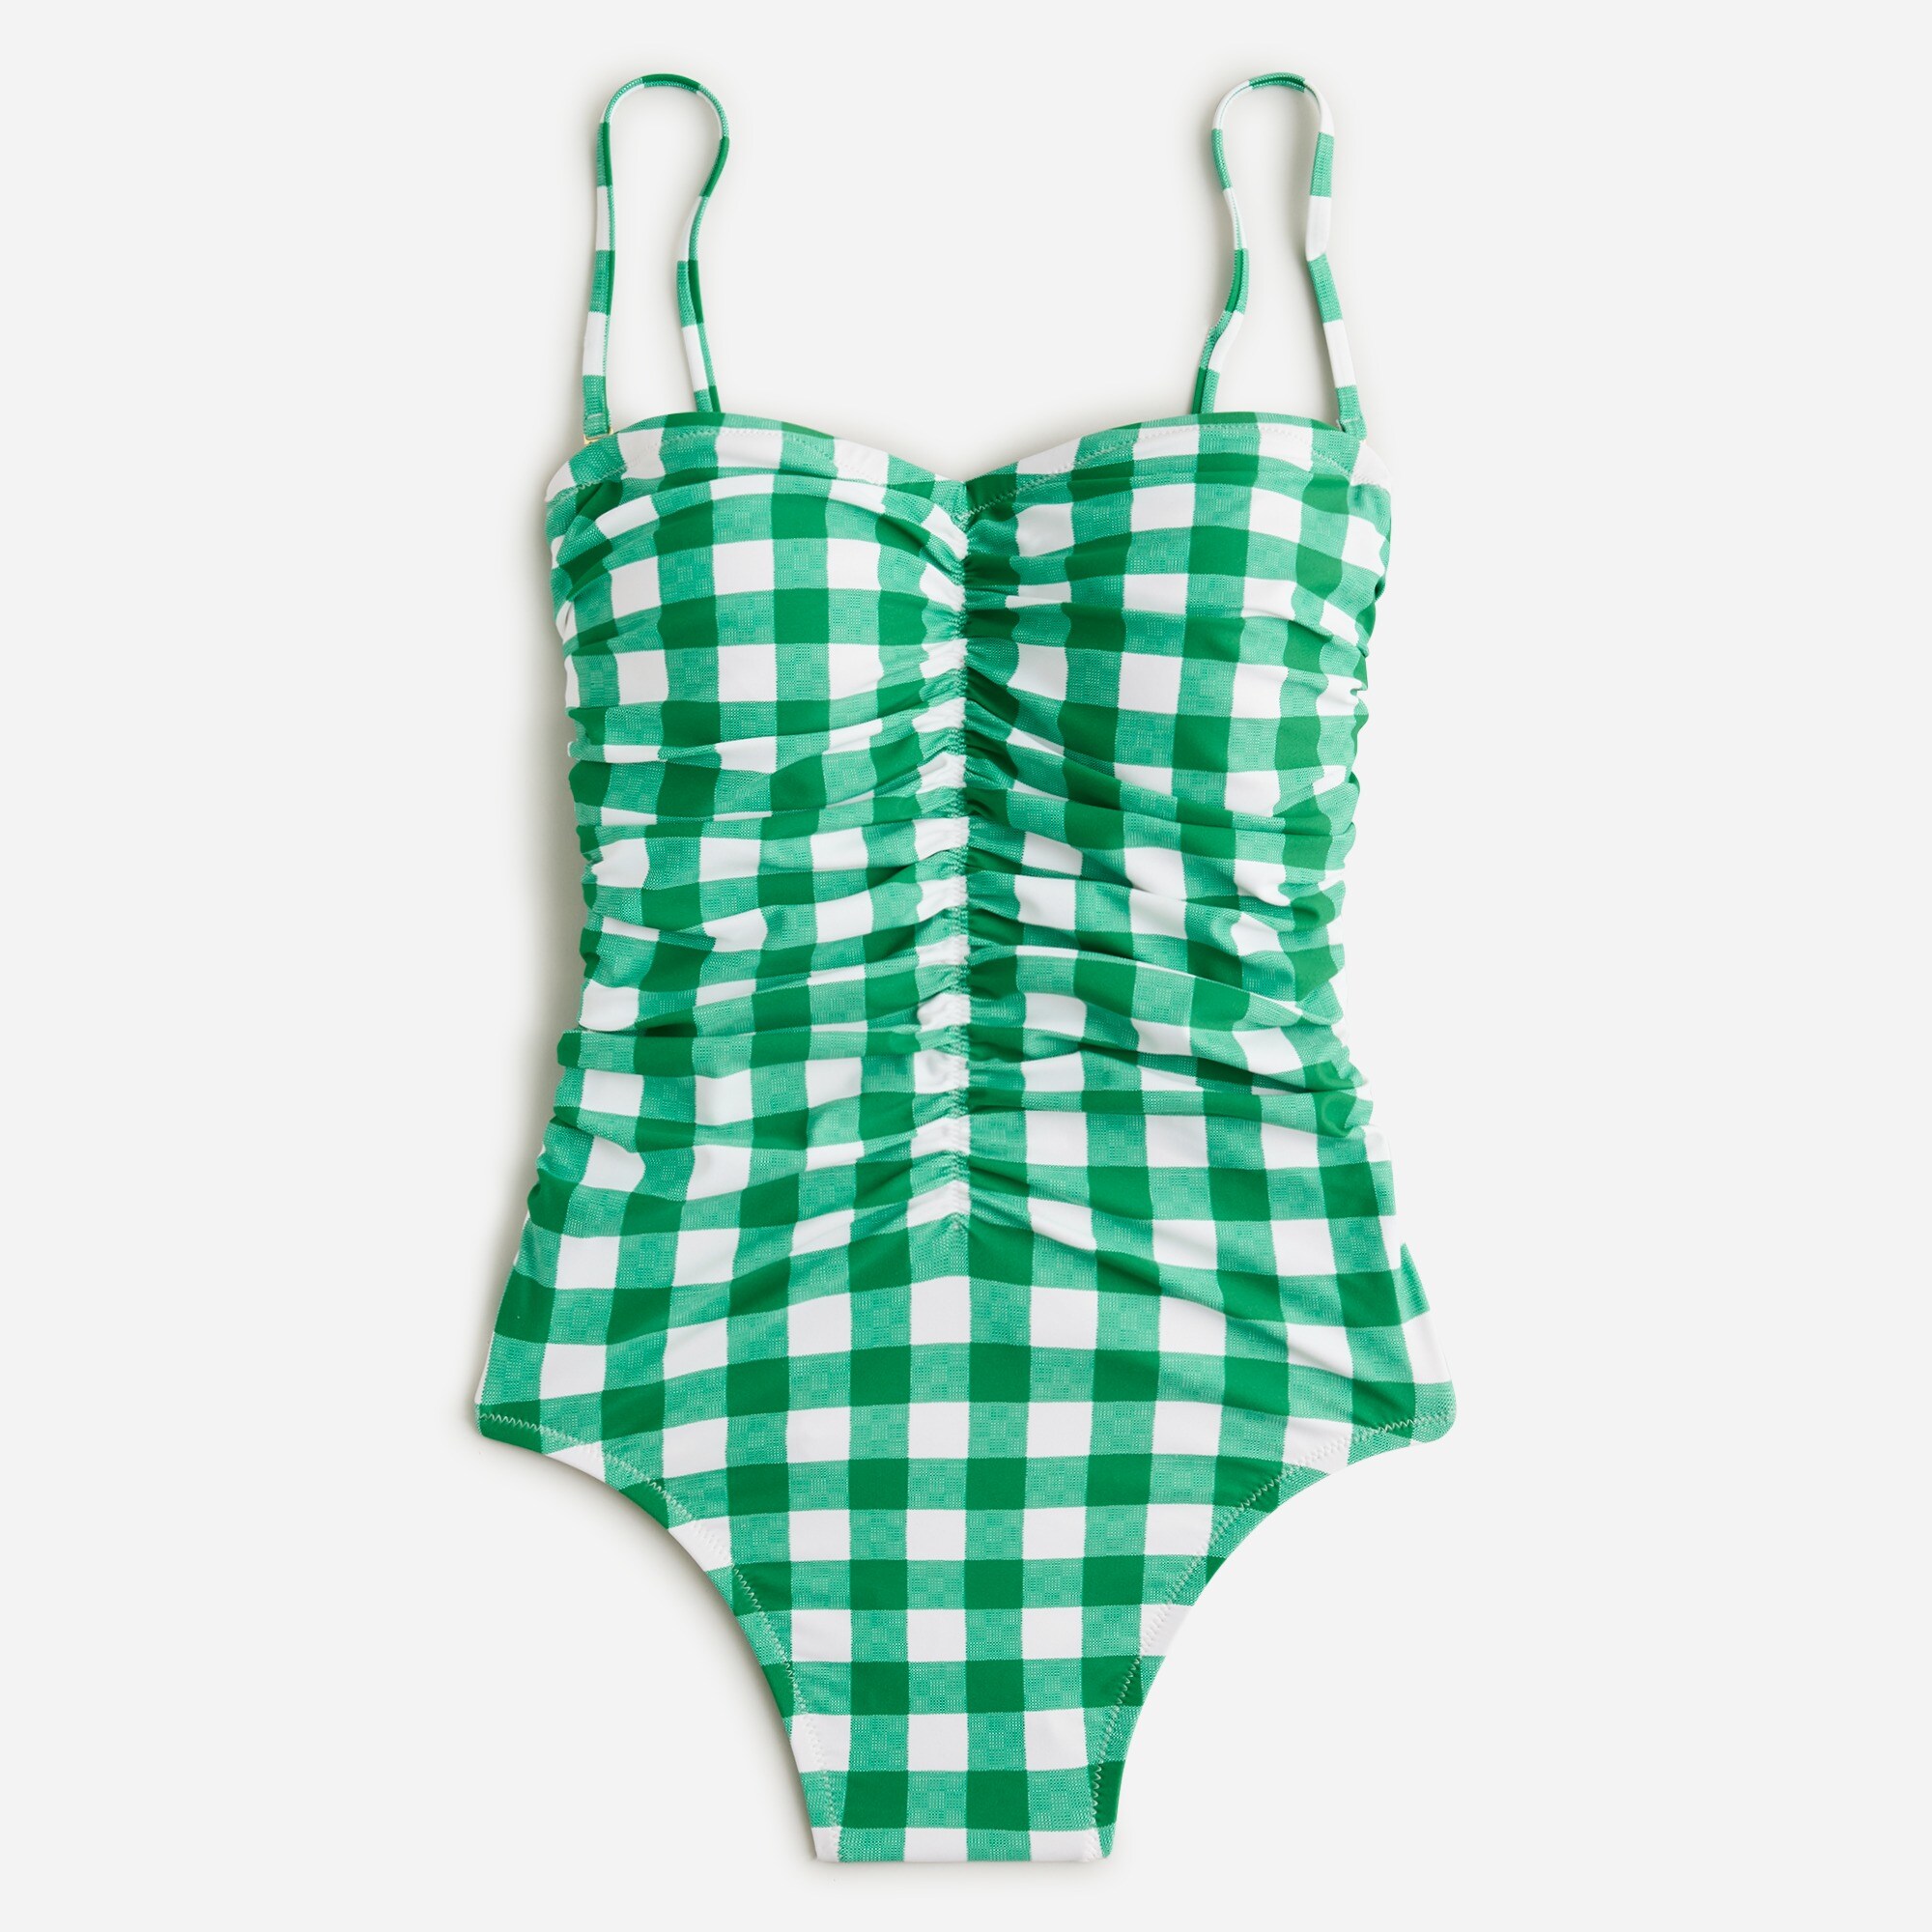  Ruched sweetheart one-piece swimsuit in green gingham